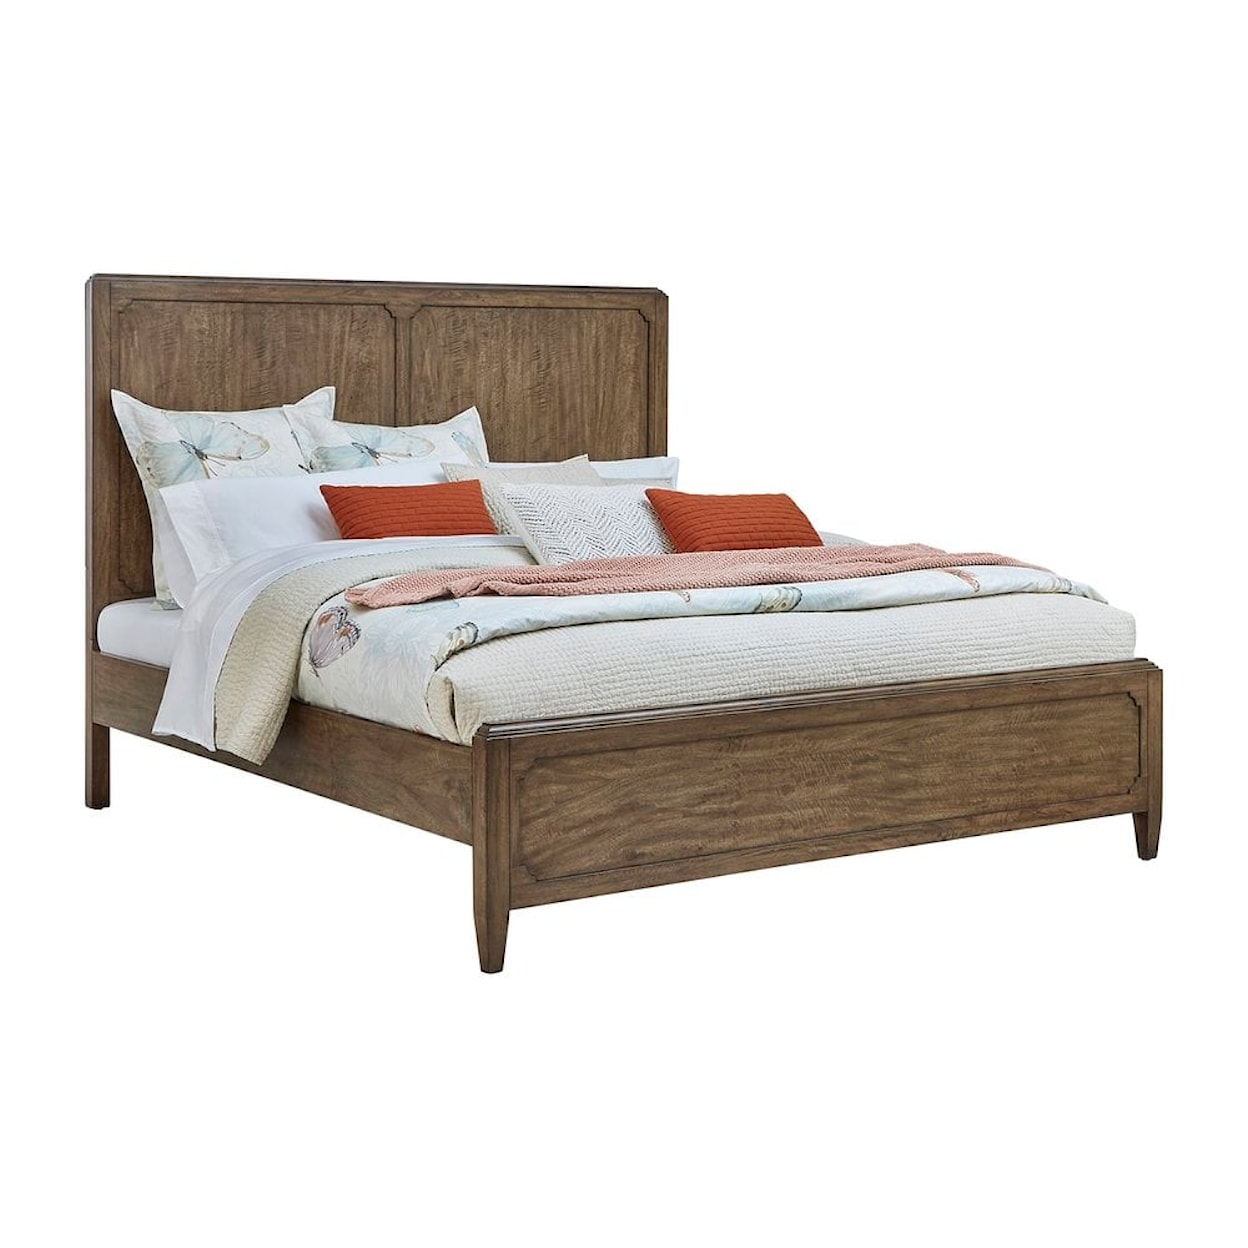 Carolina Chairs Hollis Queen Panel Bed